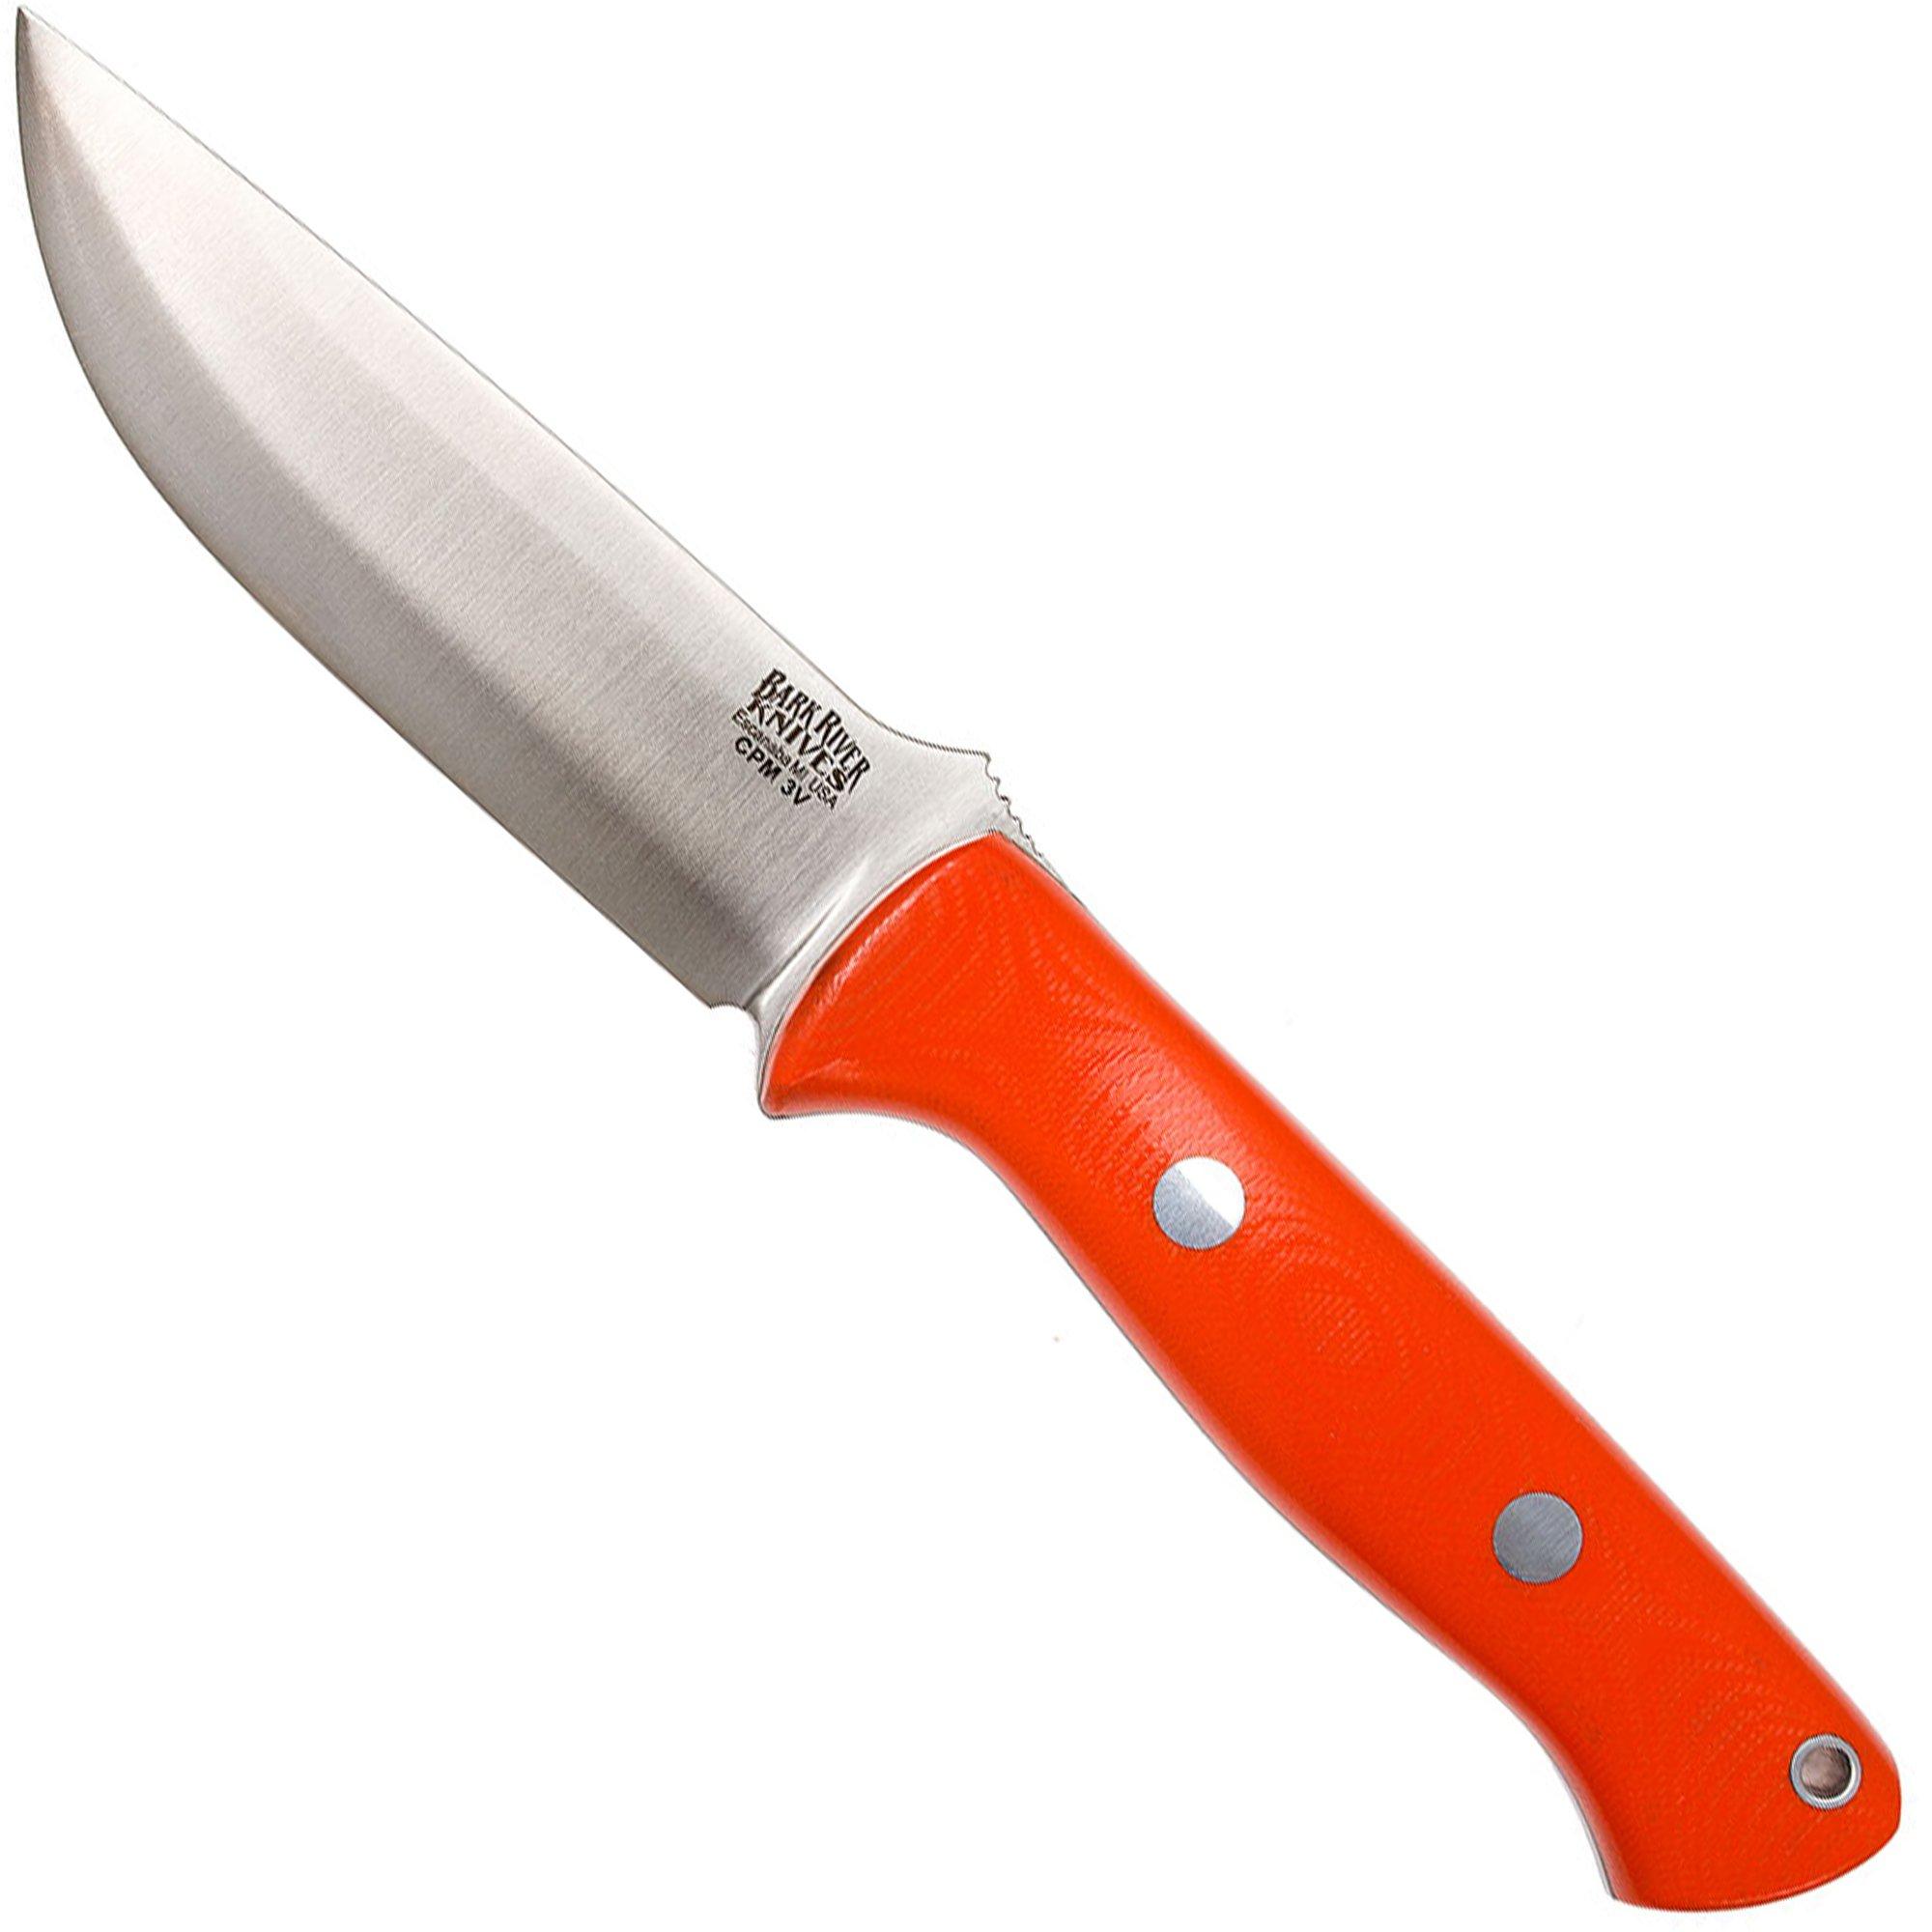 Bark River Bravo | All knives tested and in stock!